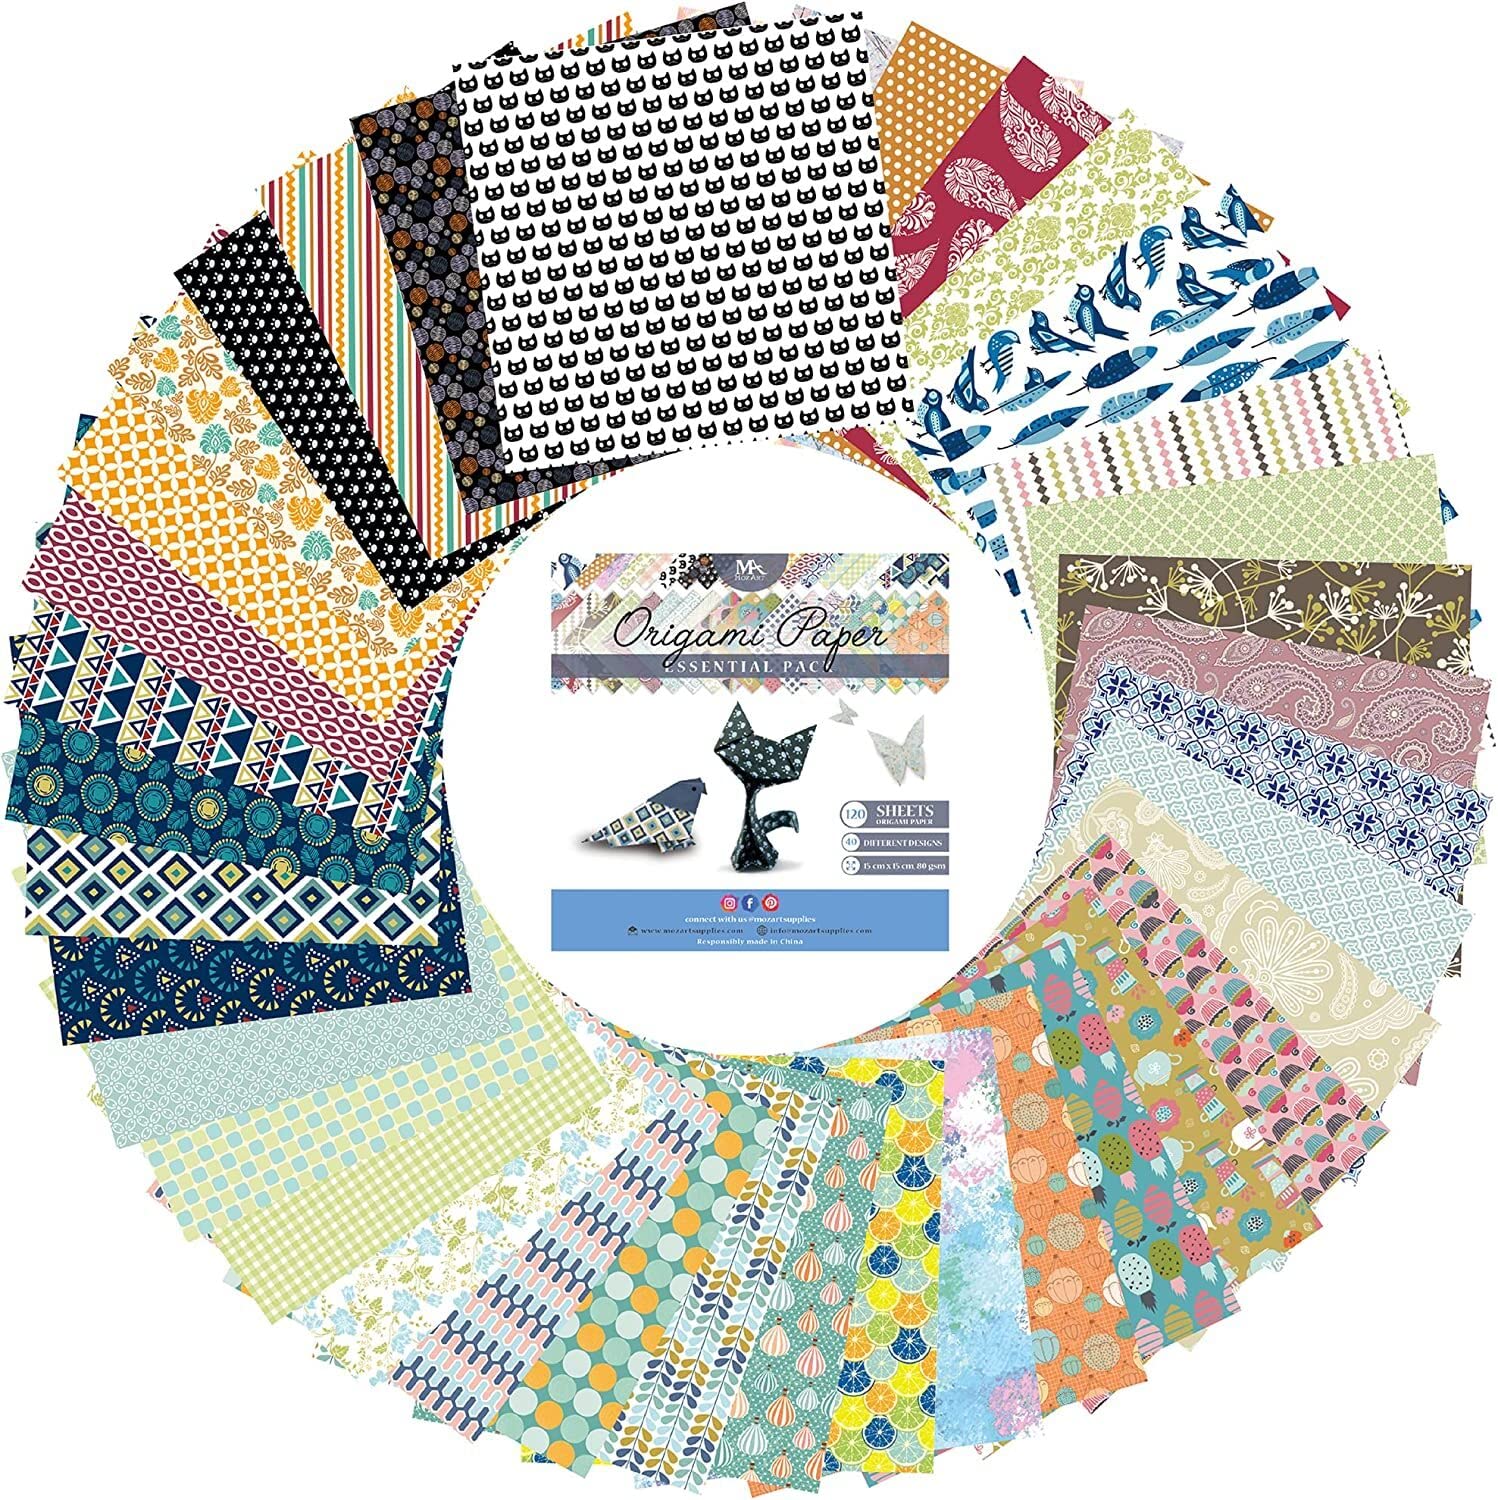 Origami Paper Set - 120 Sheets - Traditional Japanese Folding